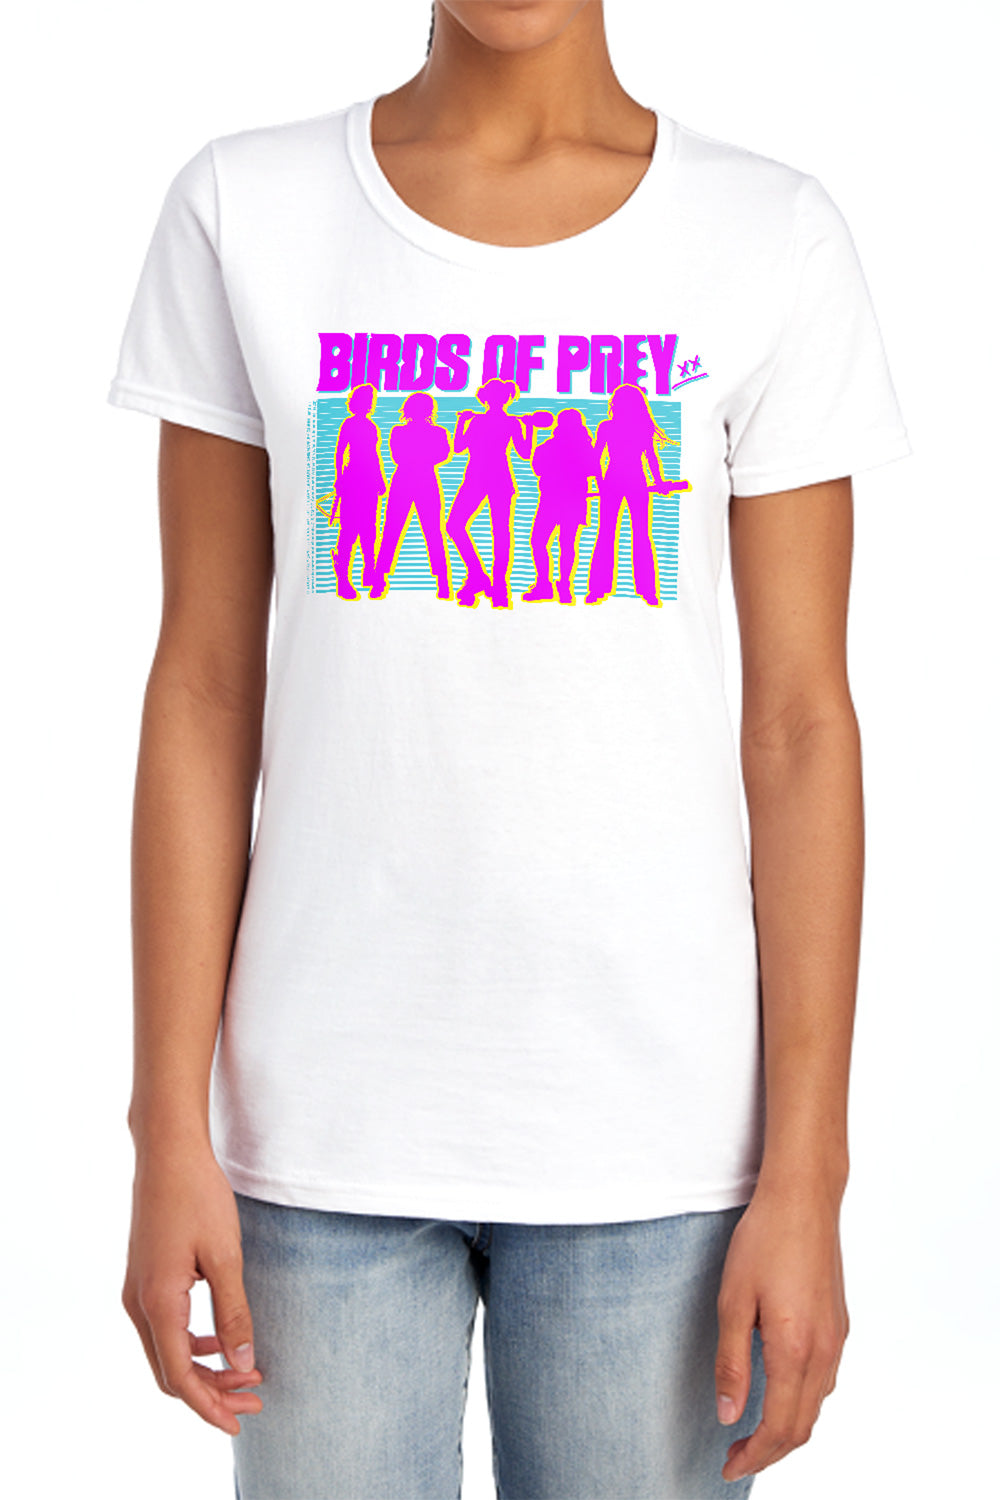 BIRDS OF PREY : SILHOUETTES WOMENS SHORT SLEEVE White MD